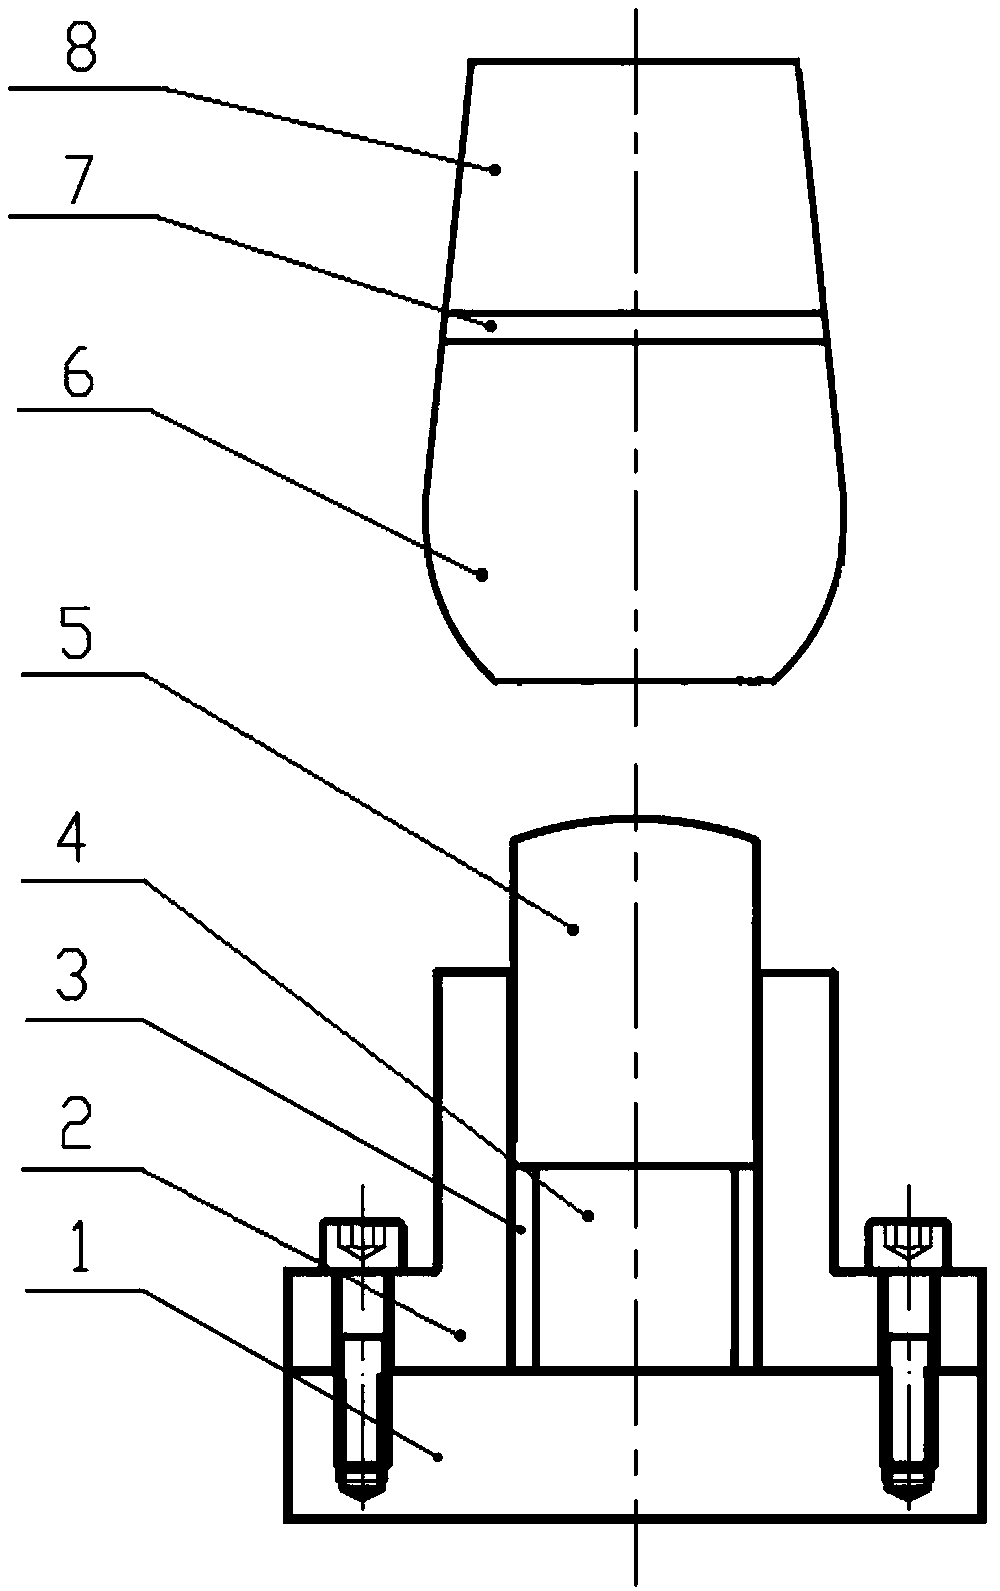 Drop weight impact test device for secondary loading